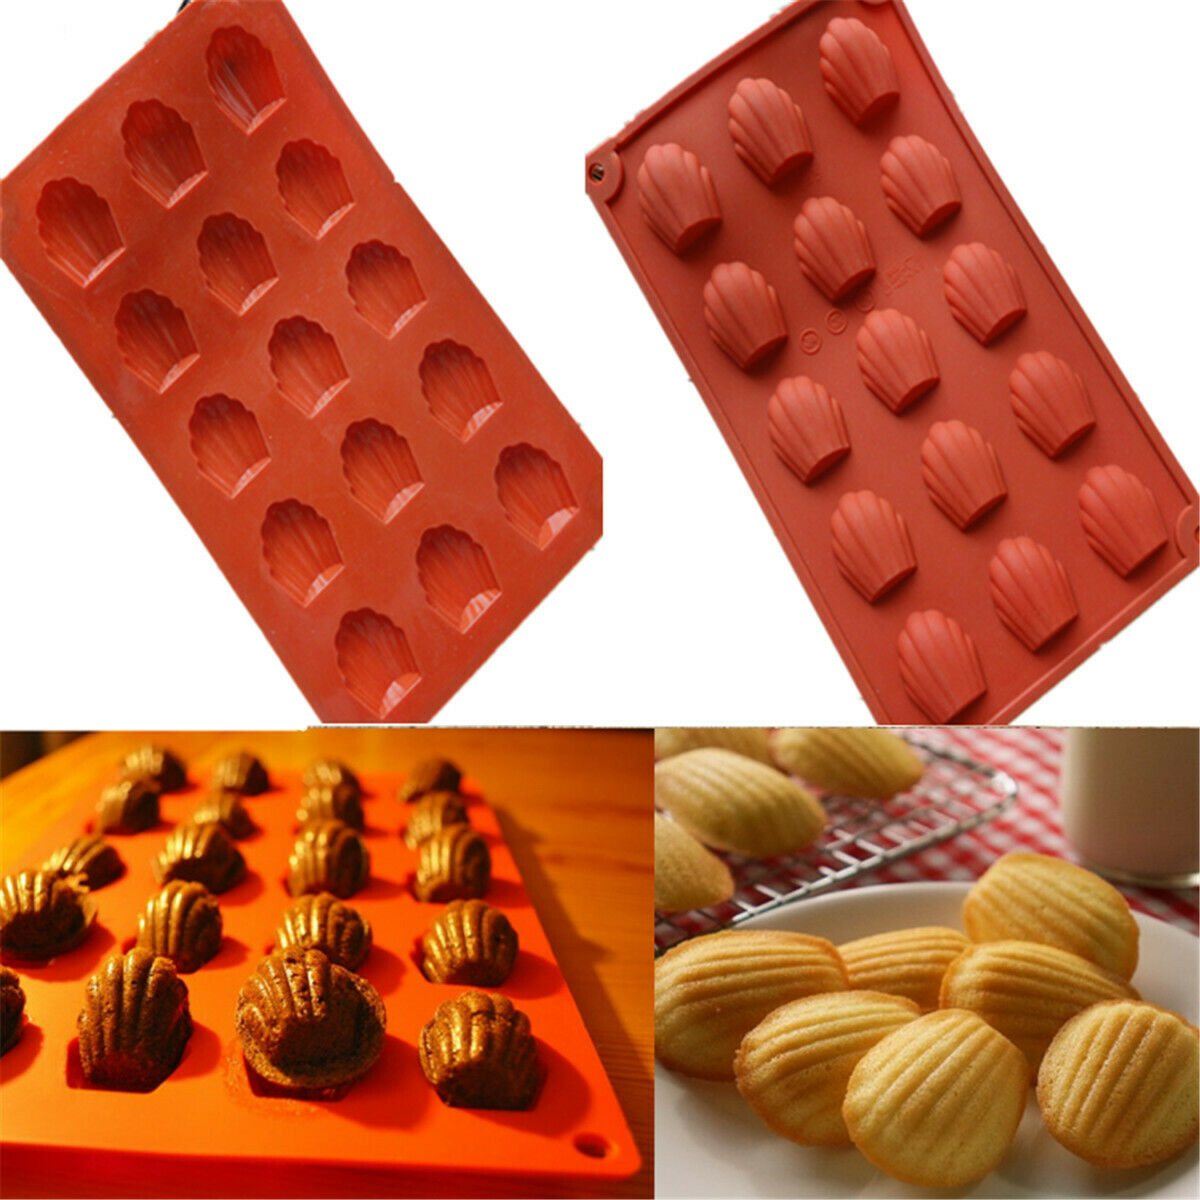 15 holes Madeleine Silicone Cake Baking Mould Pans Shell Biscuit Cookie DIY Mold